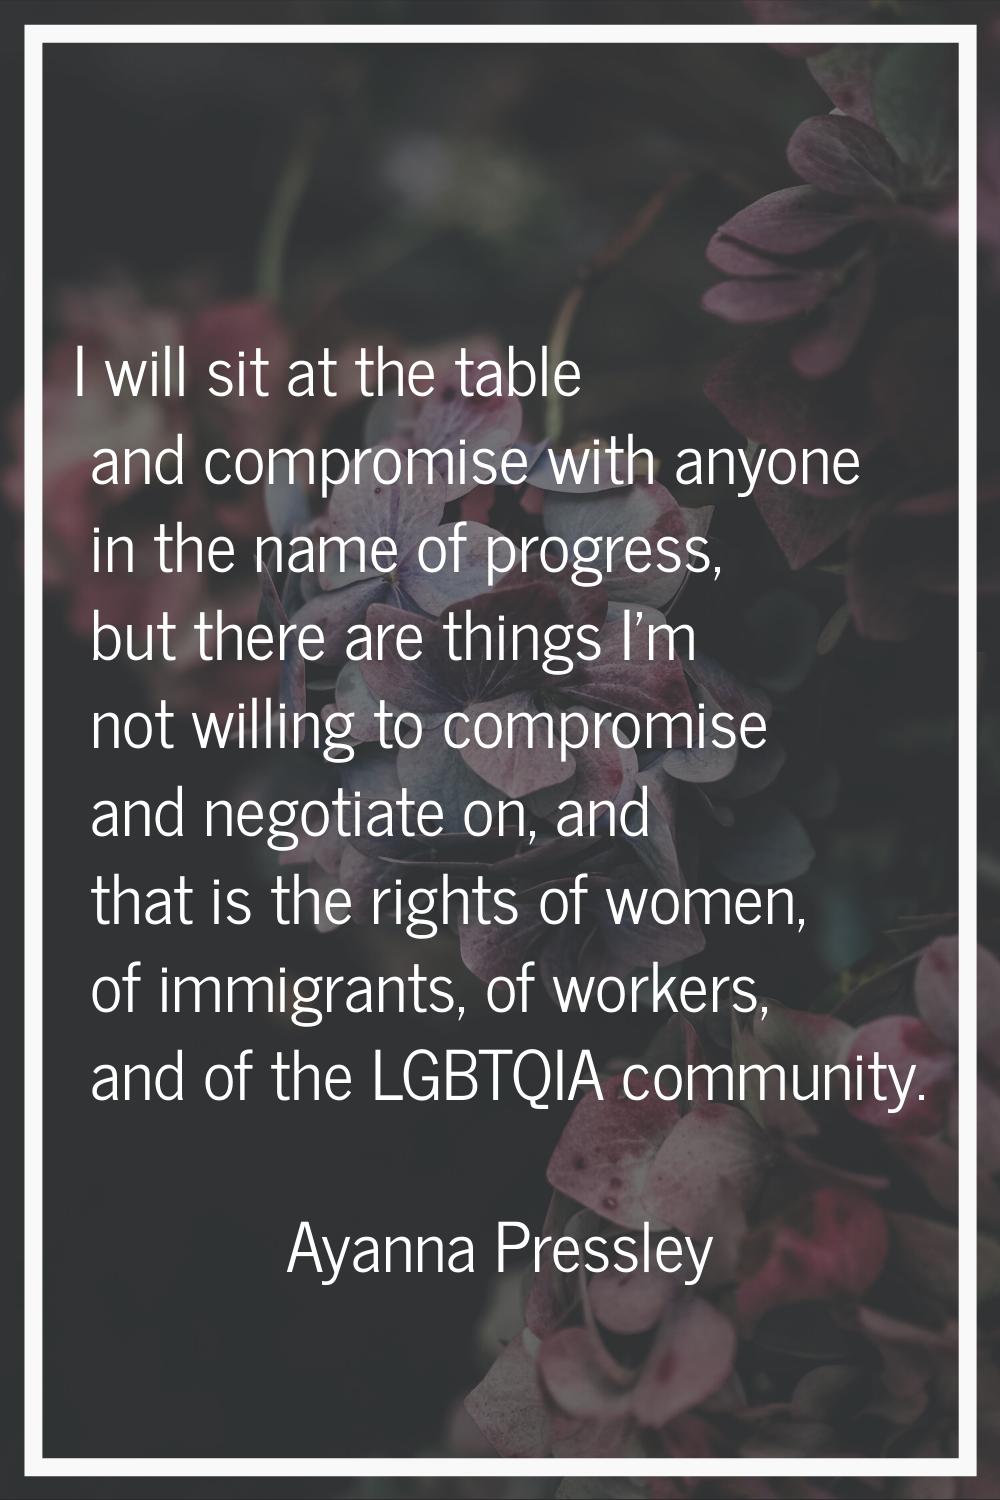 I will sit at the table and compromise with anyone in the name of progress, but there are things I'